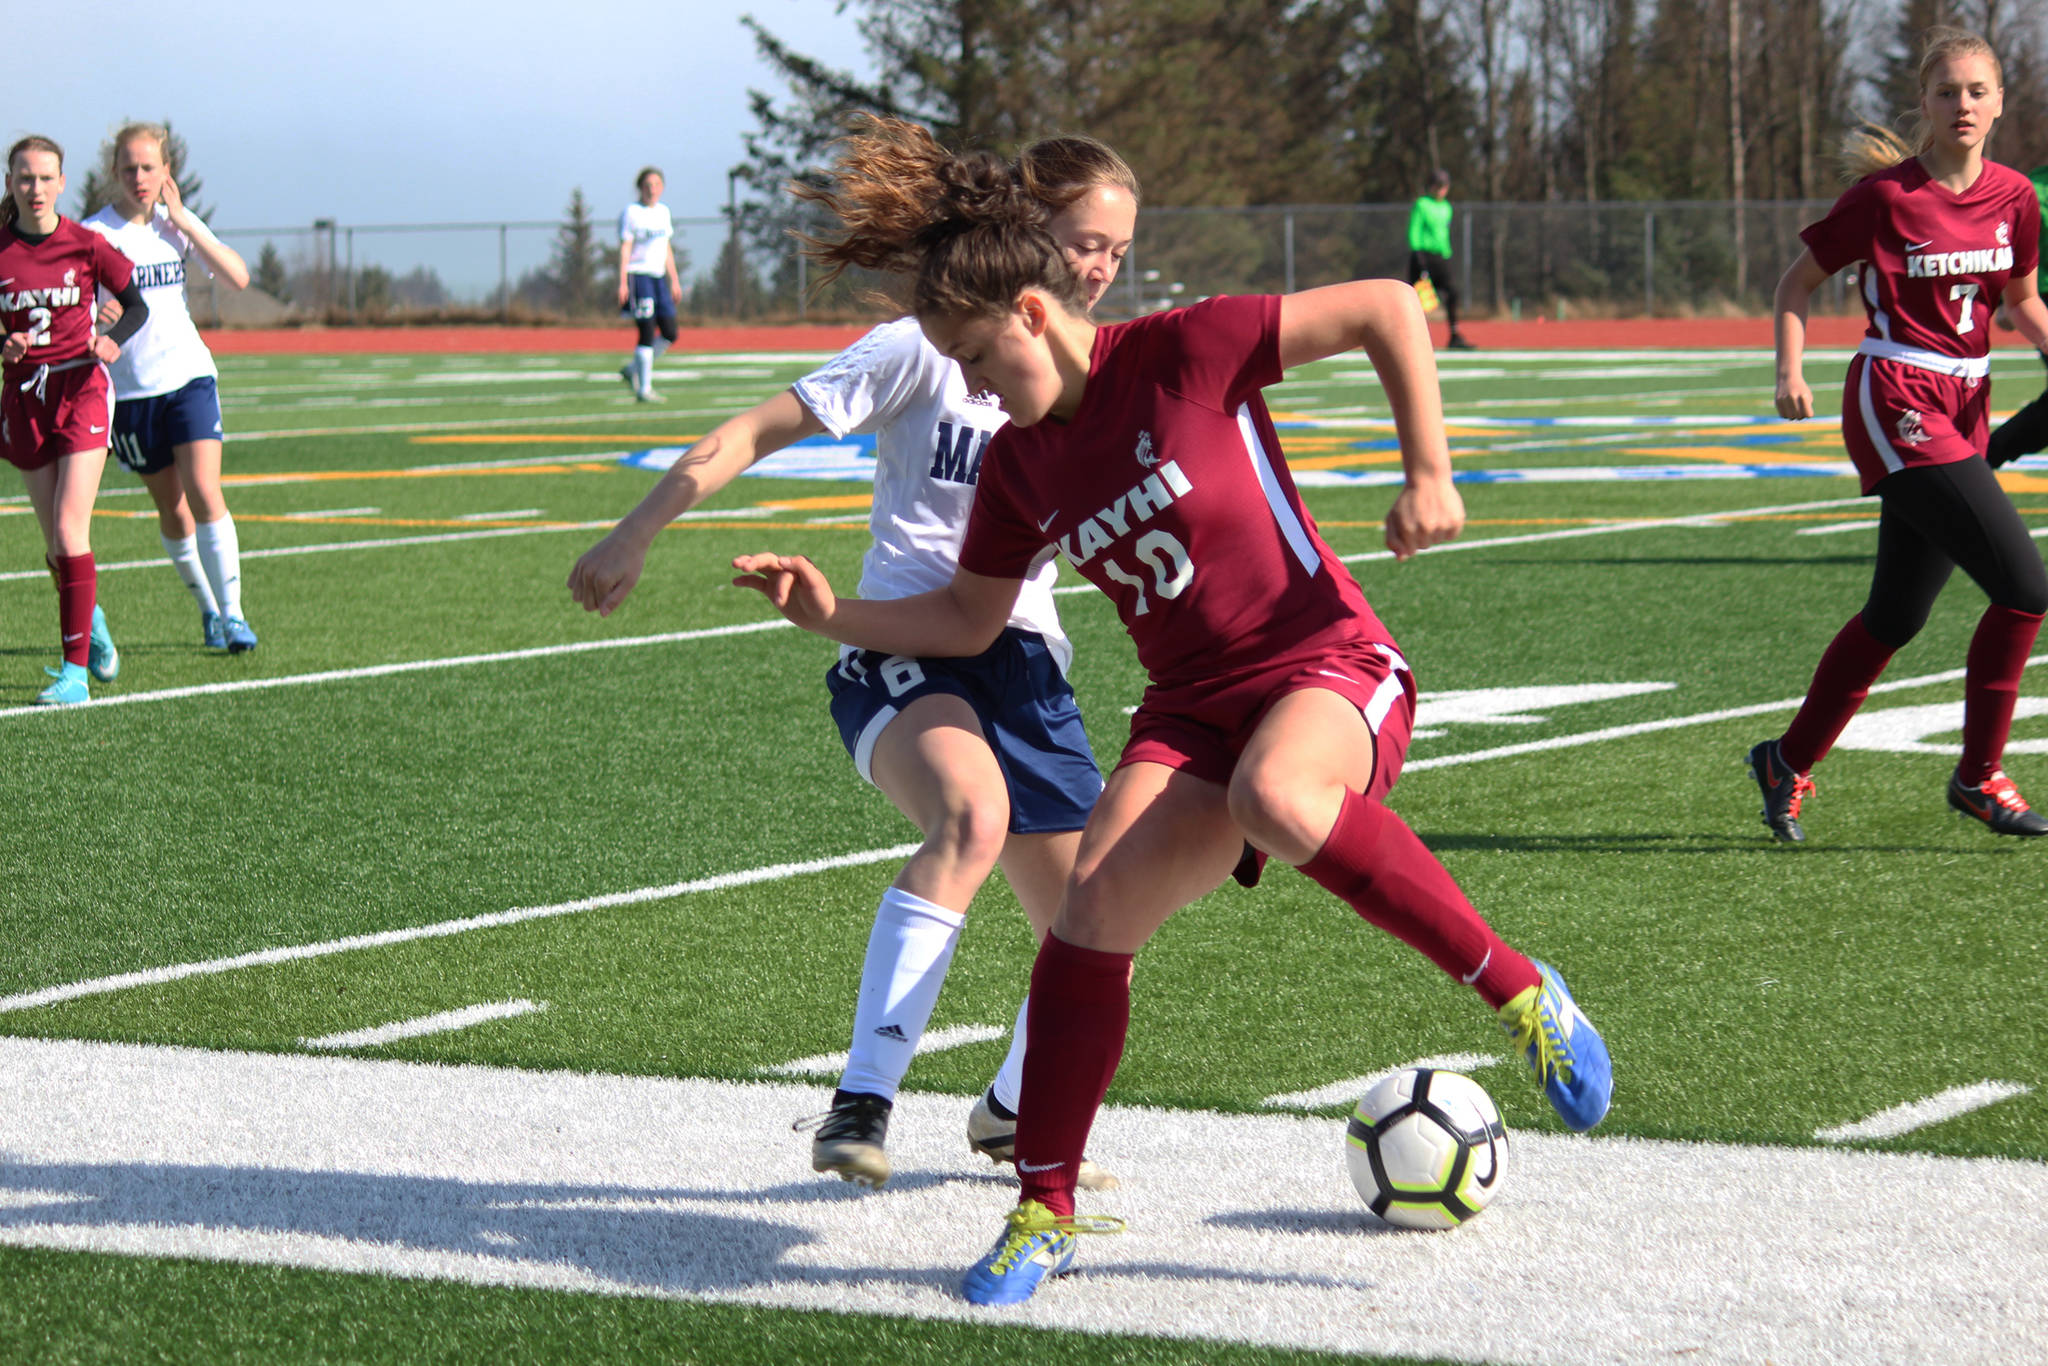 Ketchikan’s Collette Rhein tries to keep the ball away from Homer’s Eve Brau during their game Friday, May 4, 2018 at Homer High School in Homer, Alaska. Ketchikan won the match 2-1. (Photo by Megan Pacer/Homer News)